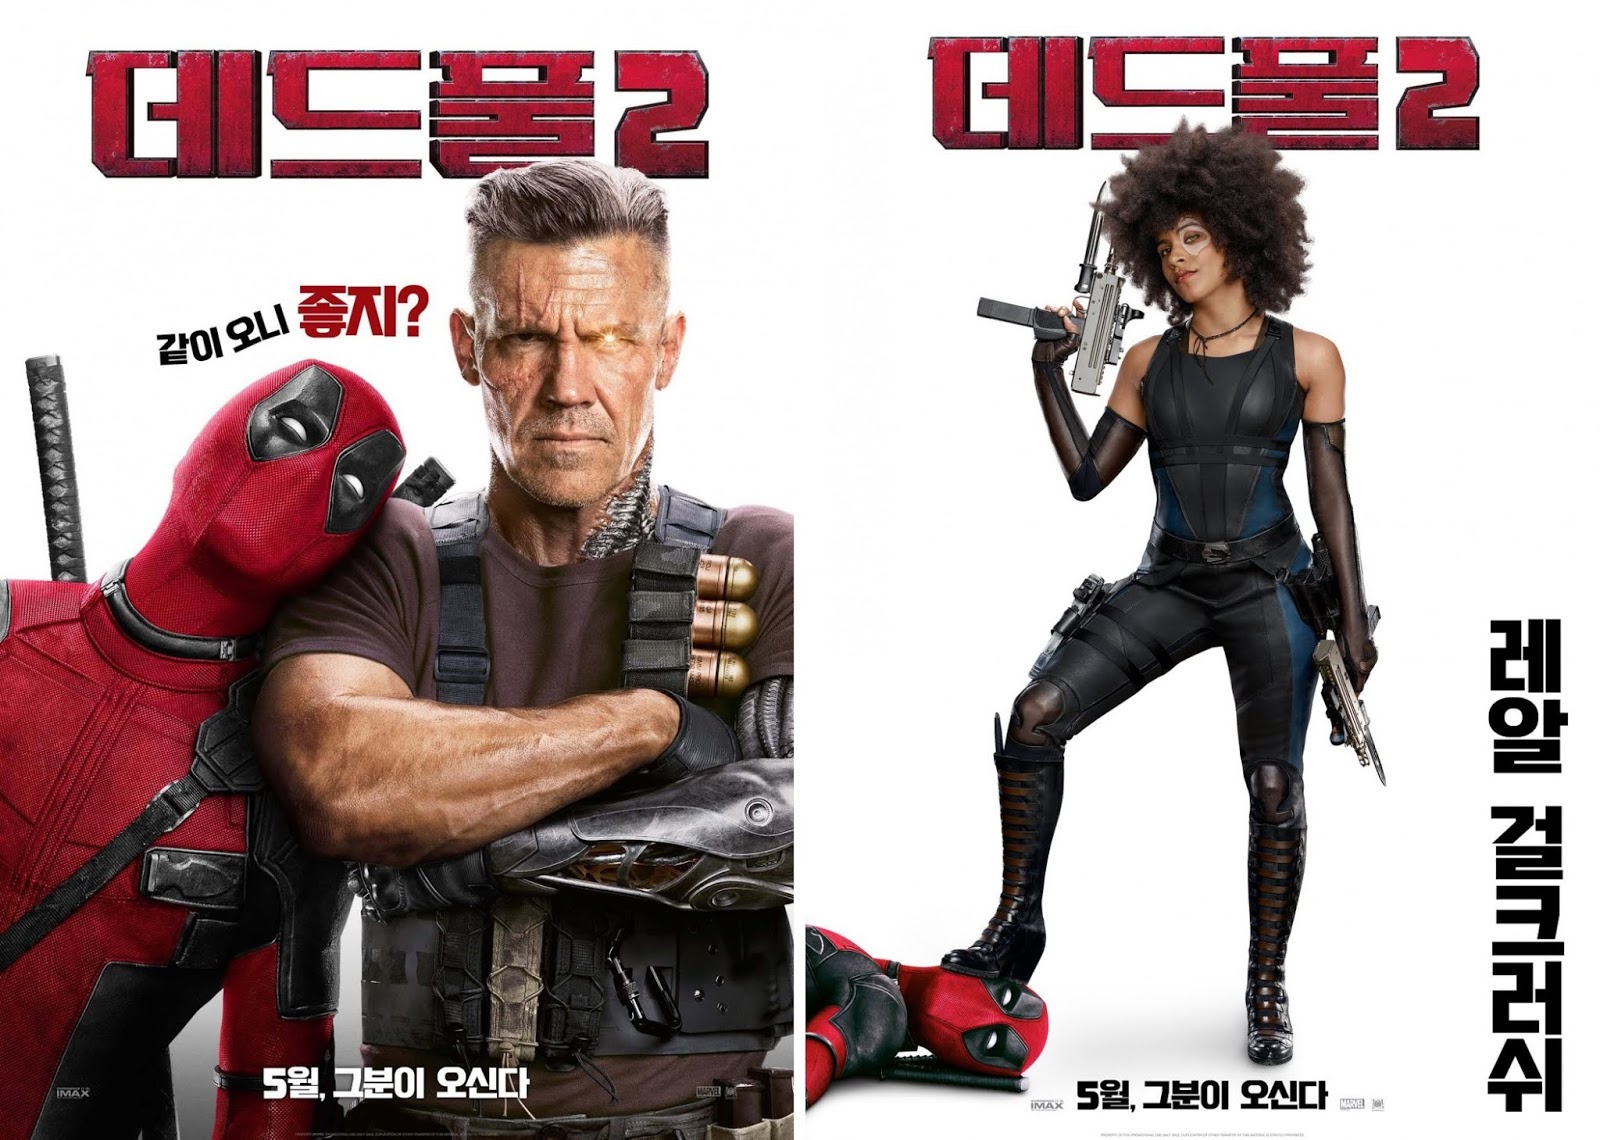 Deadpool 2: New Cable, Domino, and Deadpool Posters from Cinemacon